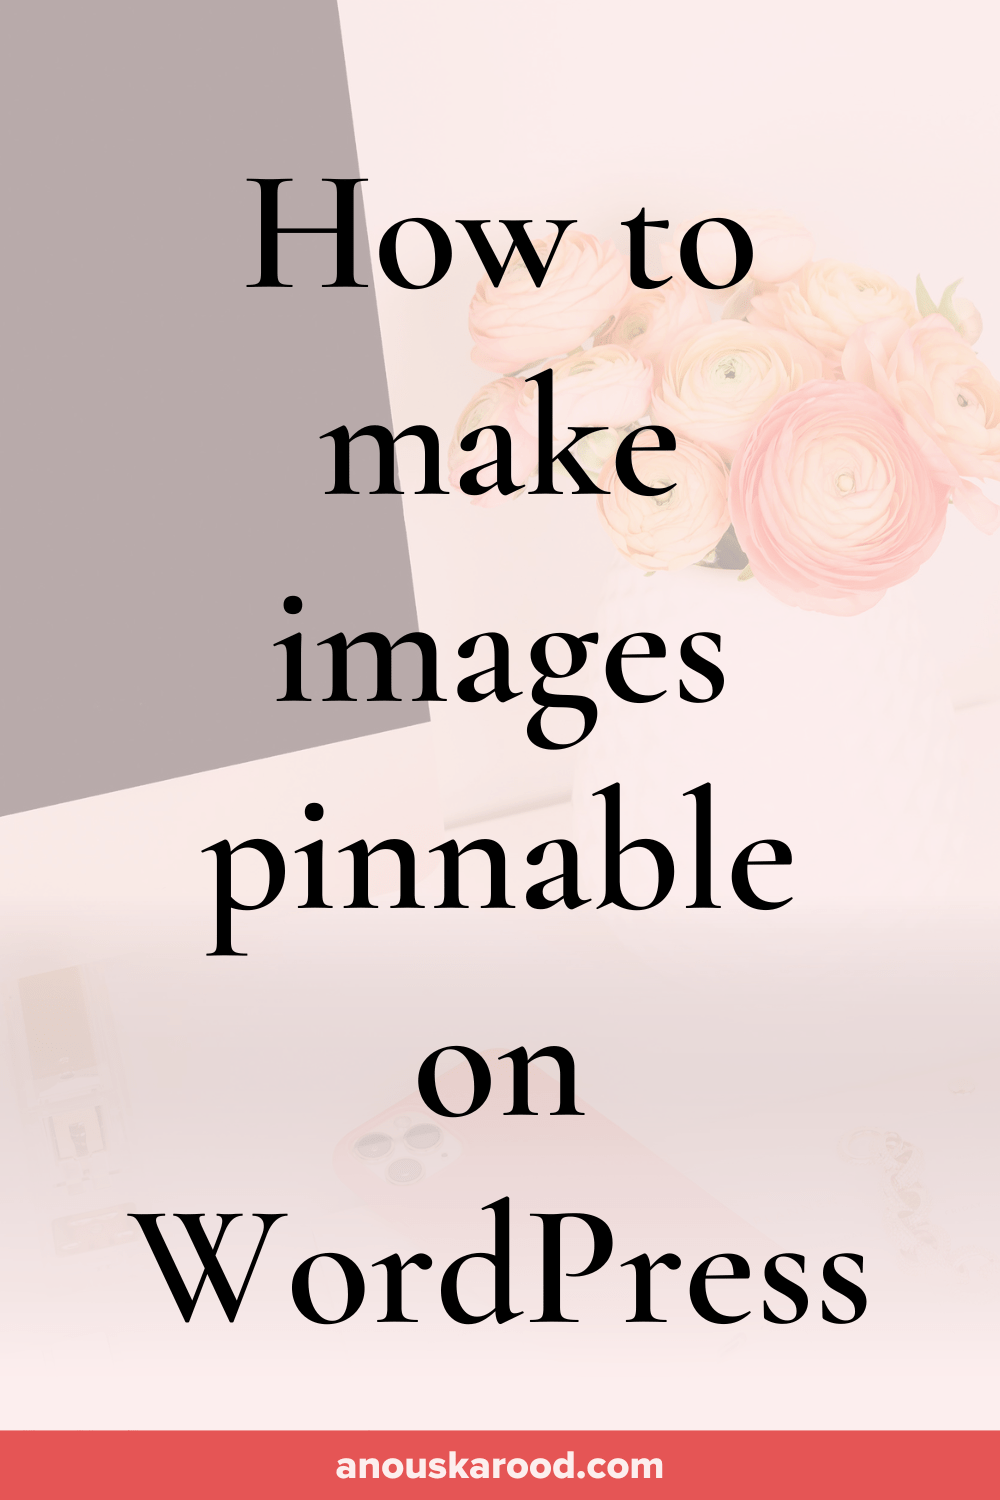 How to Make Images Pinnable on WordPress